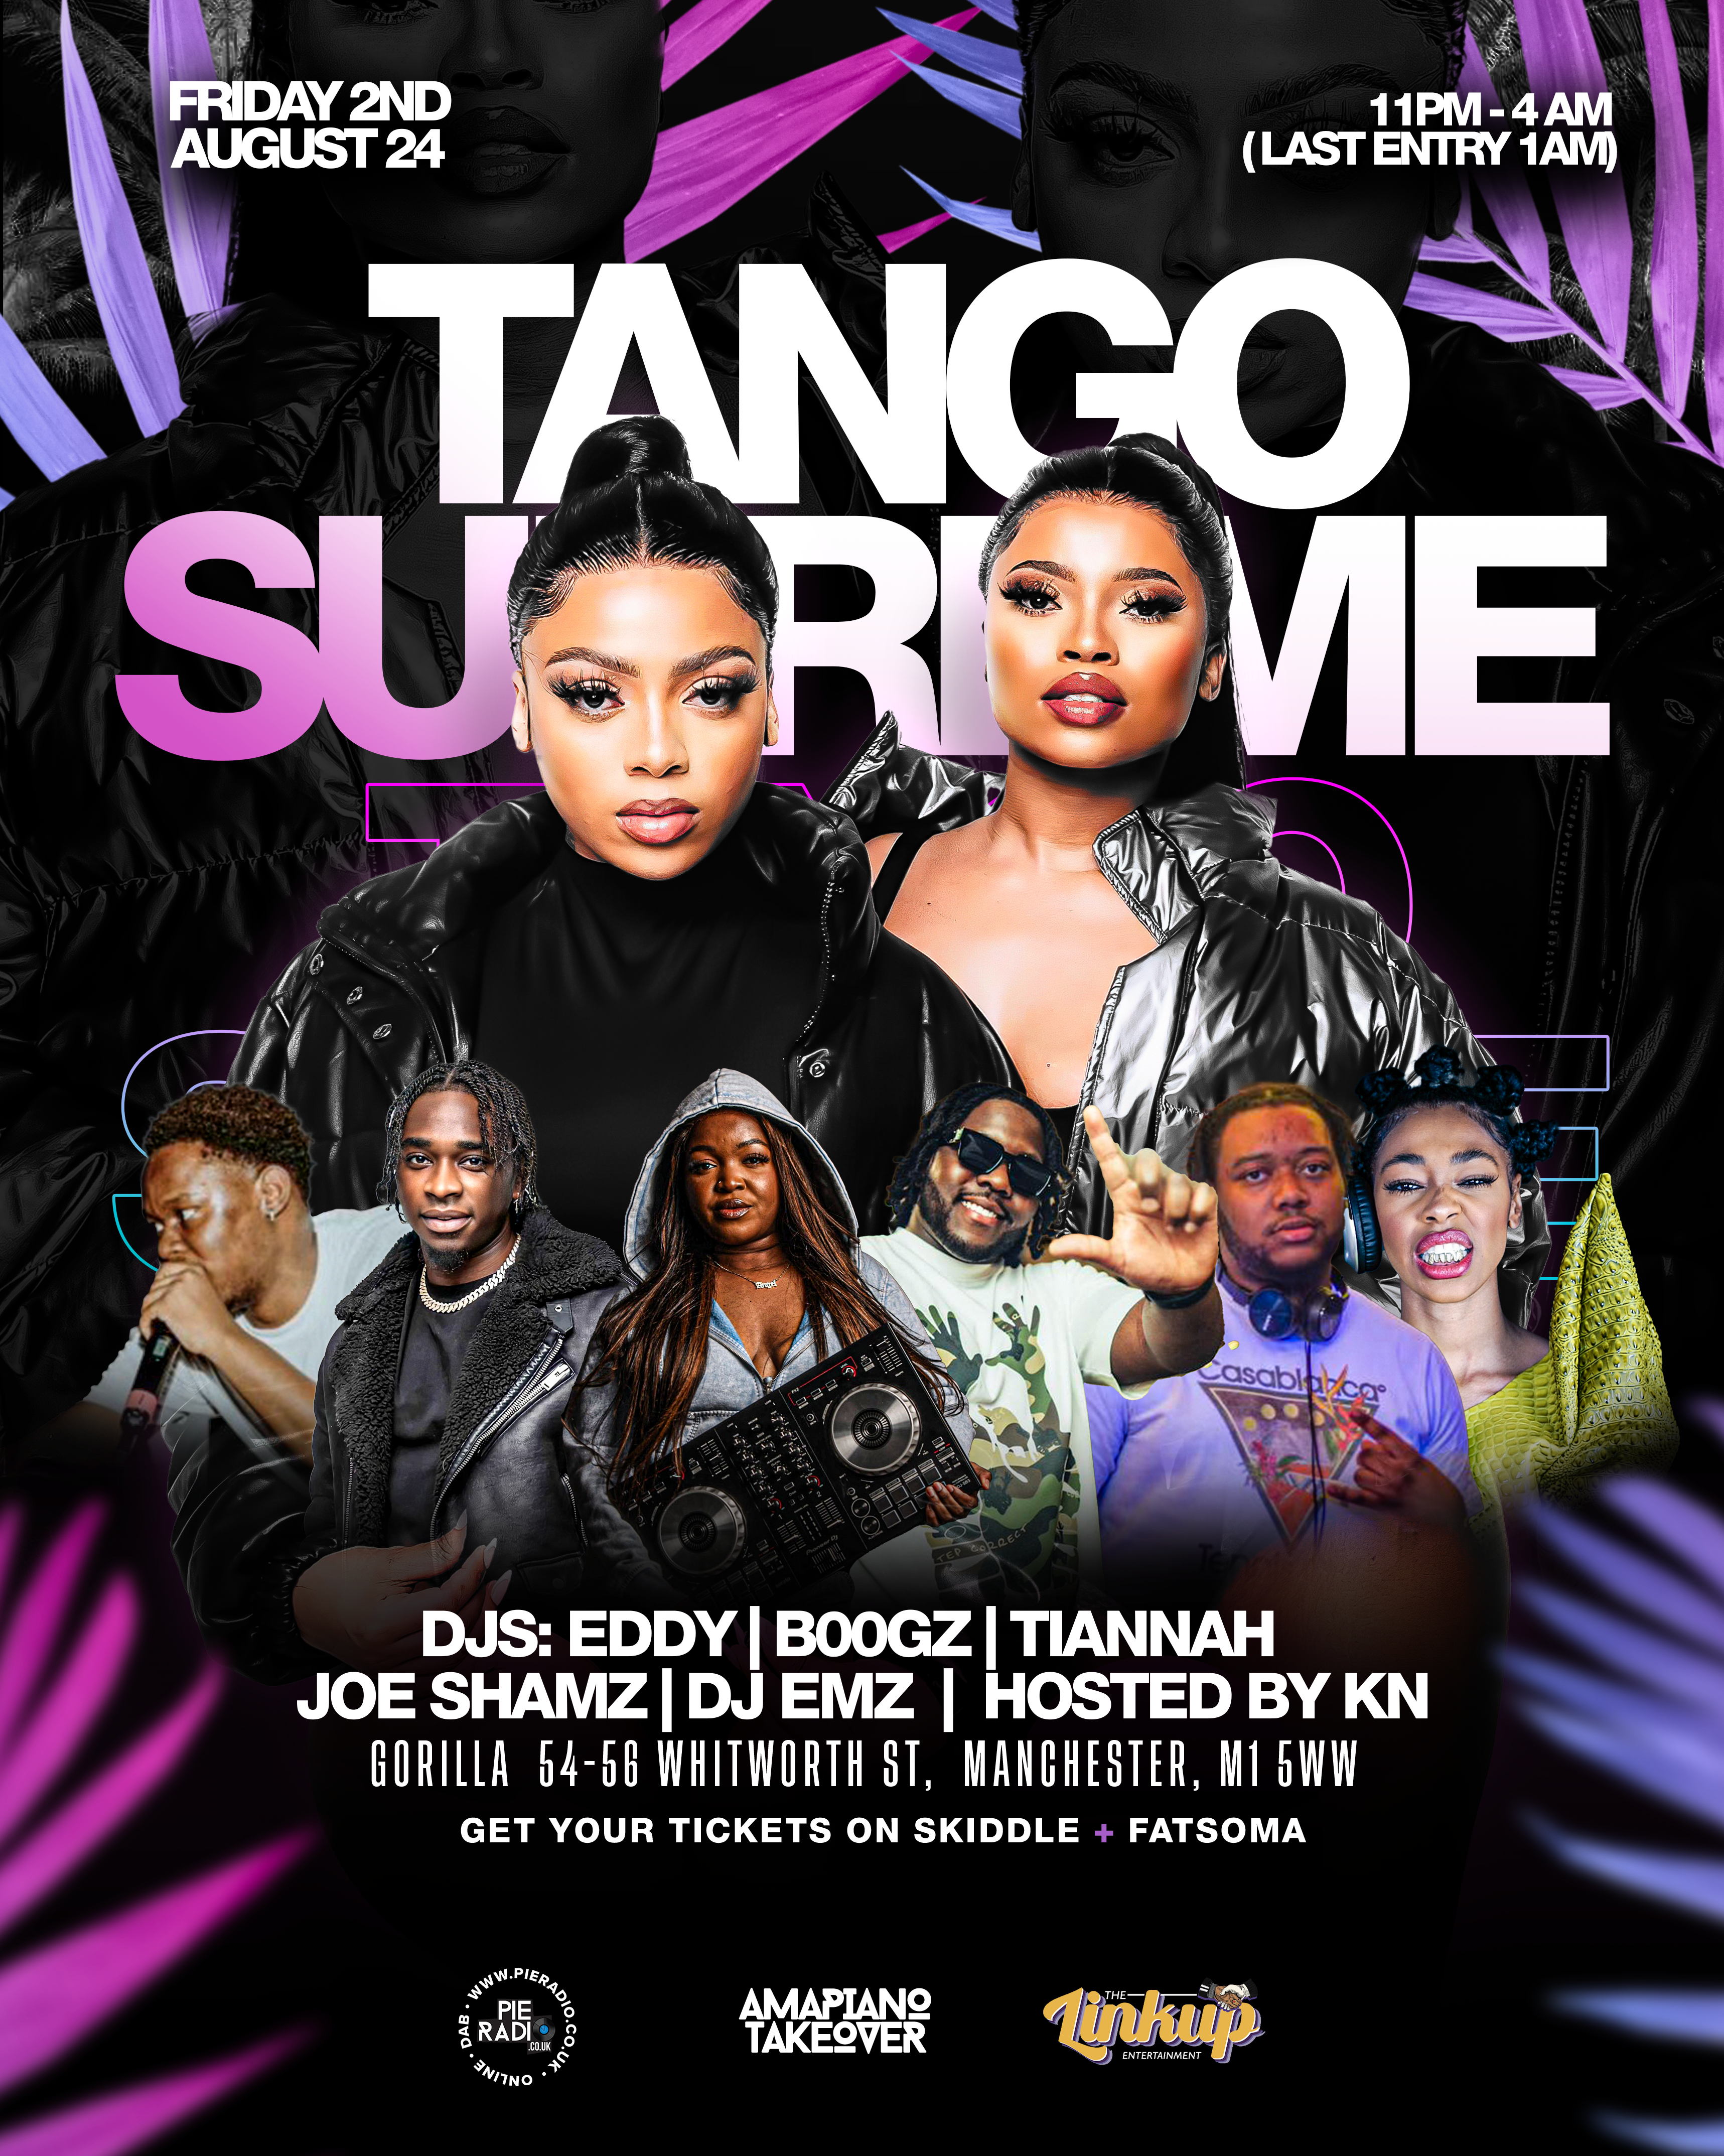 Tango Supreme Live In Manchester Best Amapiano Event Party in Manchester